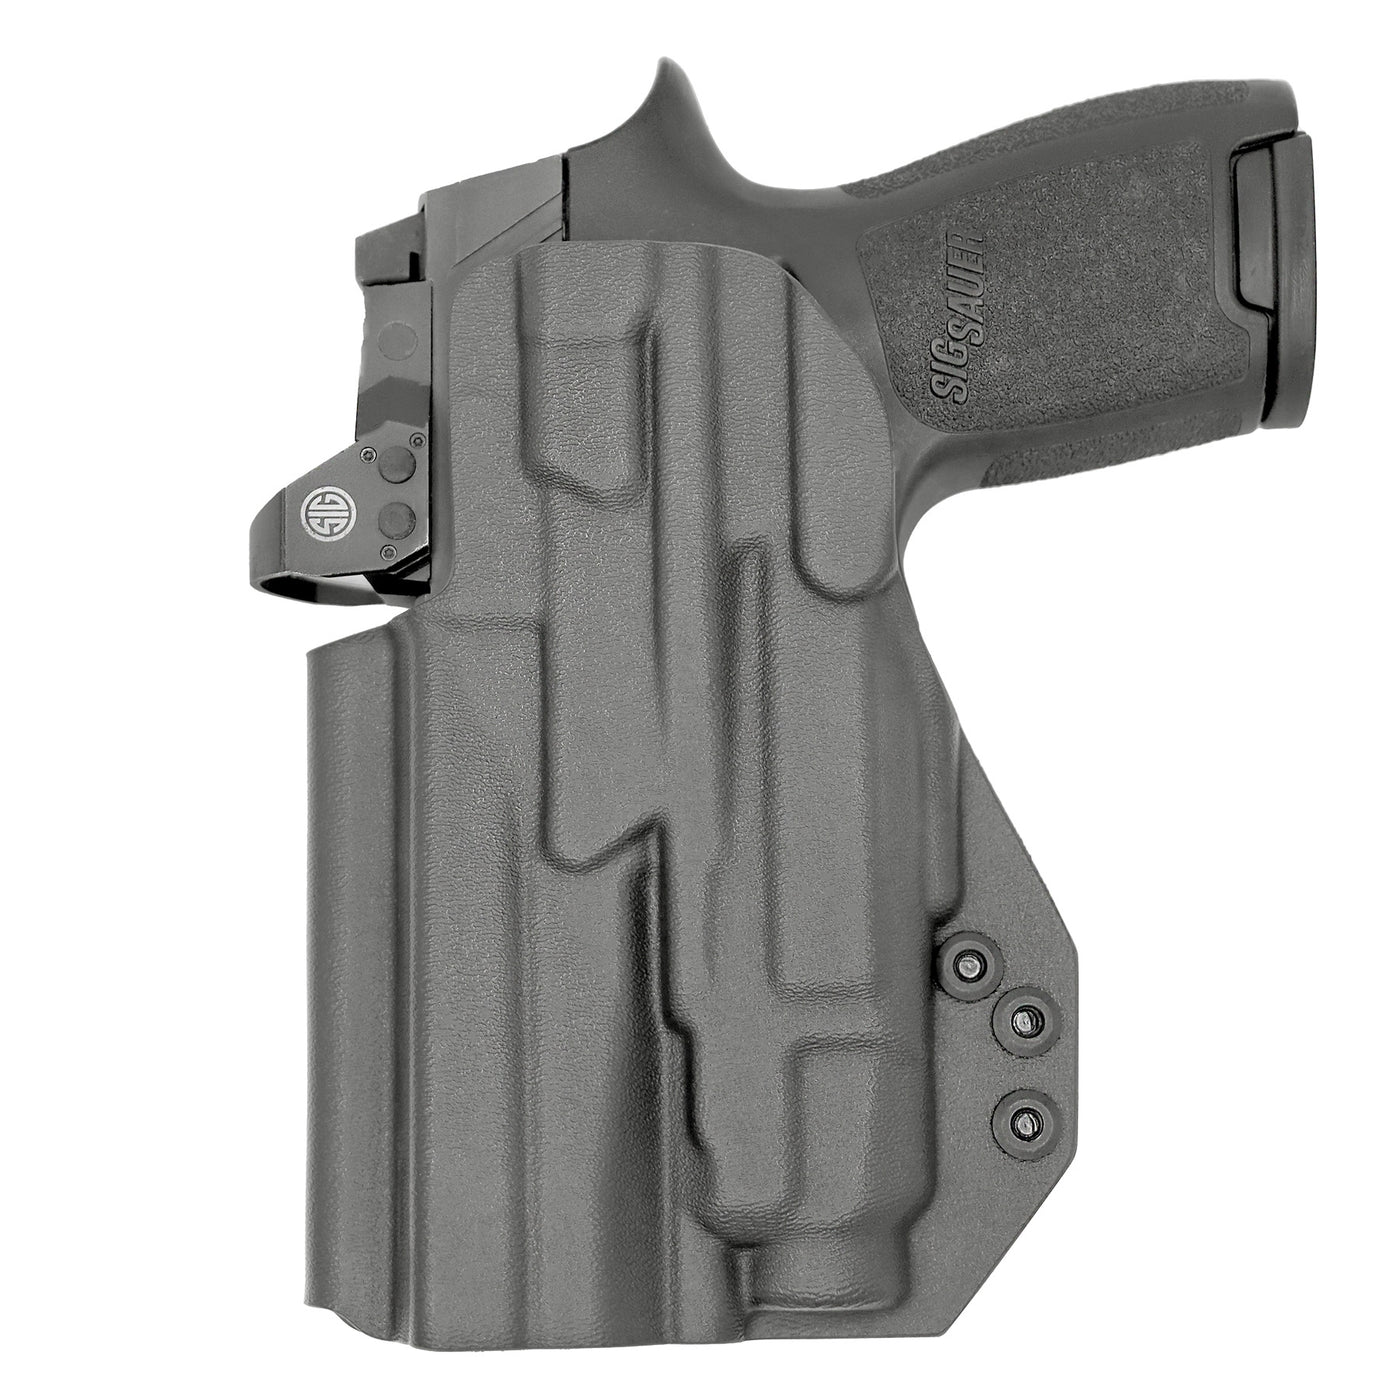 C&G Holsters quickship IWB Tactical XDM Elite streamlight tlr7/a in holstered position back view